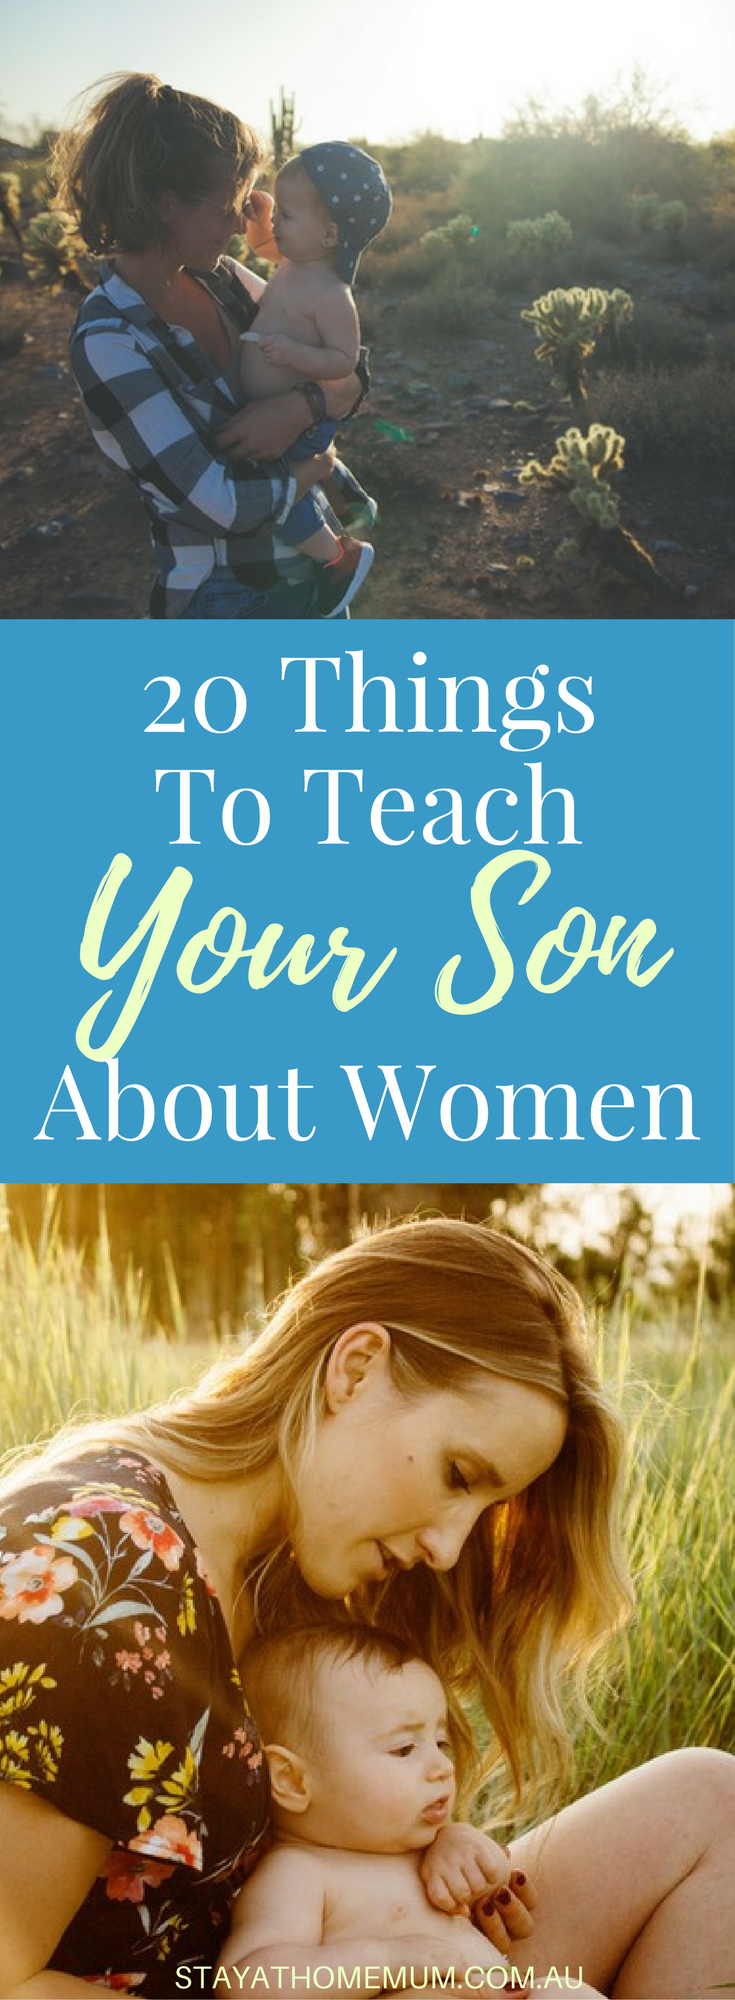 20 Things to Teach Your Son About Women | Stay At Home Mum